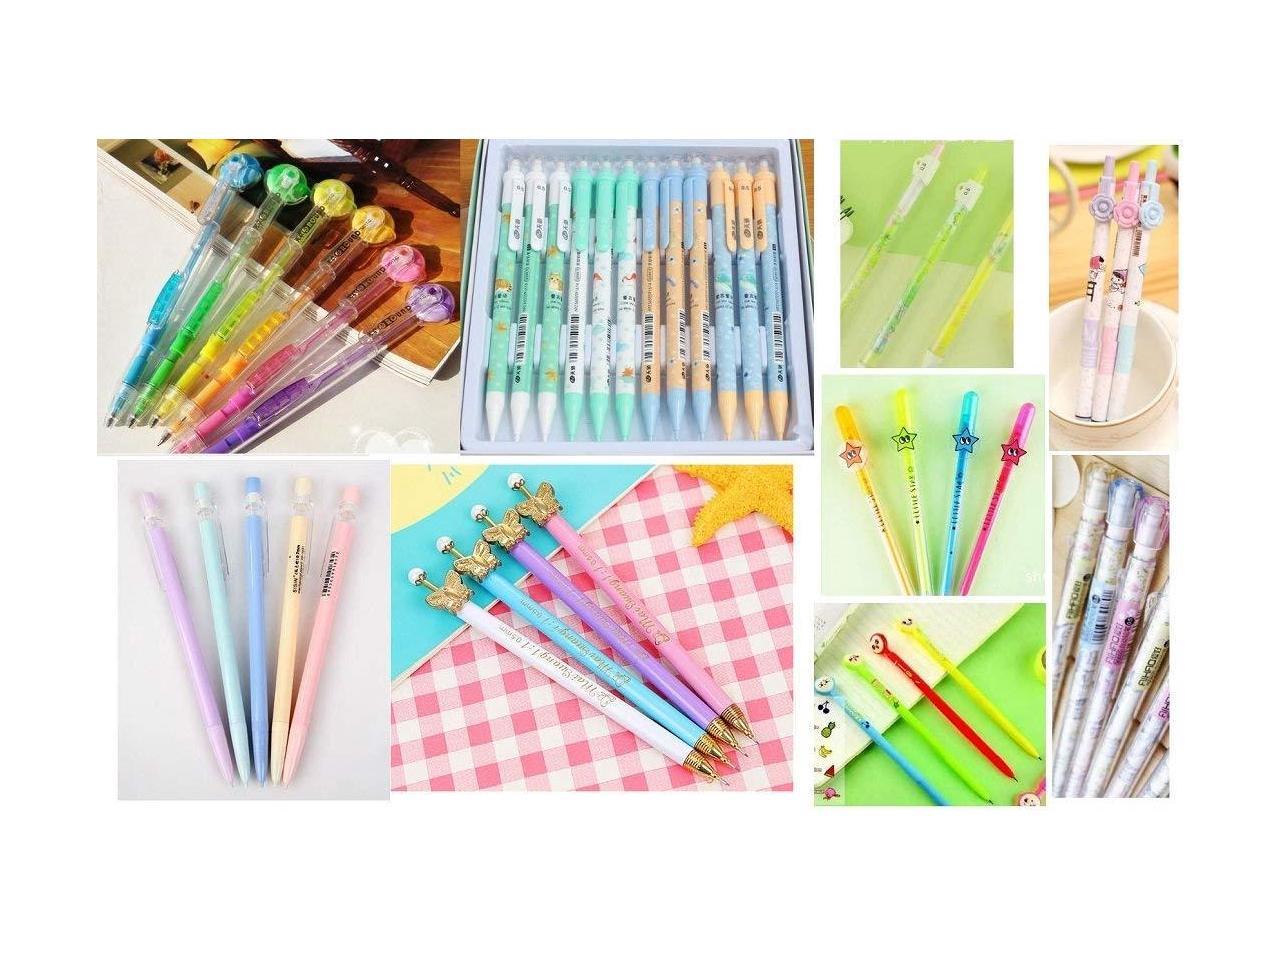 Jollin 12 Cute Korean Kawaii Mechanical Pencils With Erasers And Leading Refills Style Mixed 